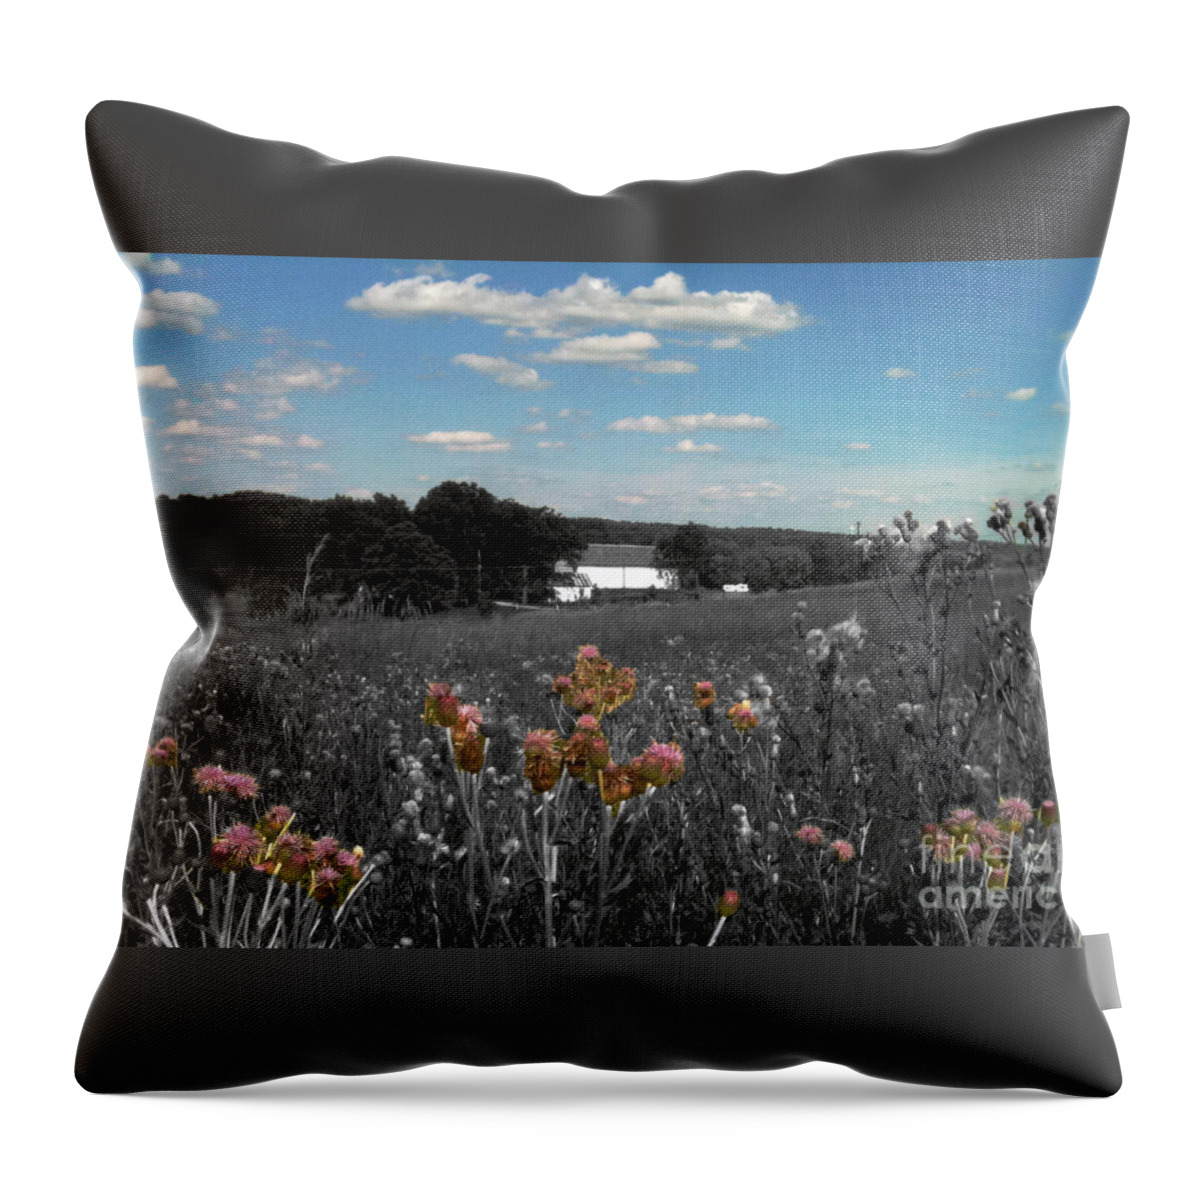 Barns Throw Pillow featuring the photograph Look They Are Blushing by Trish Hale